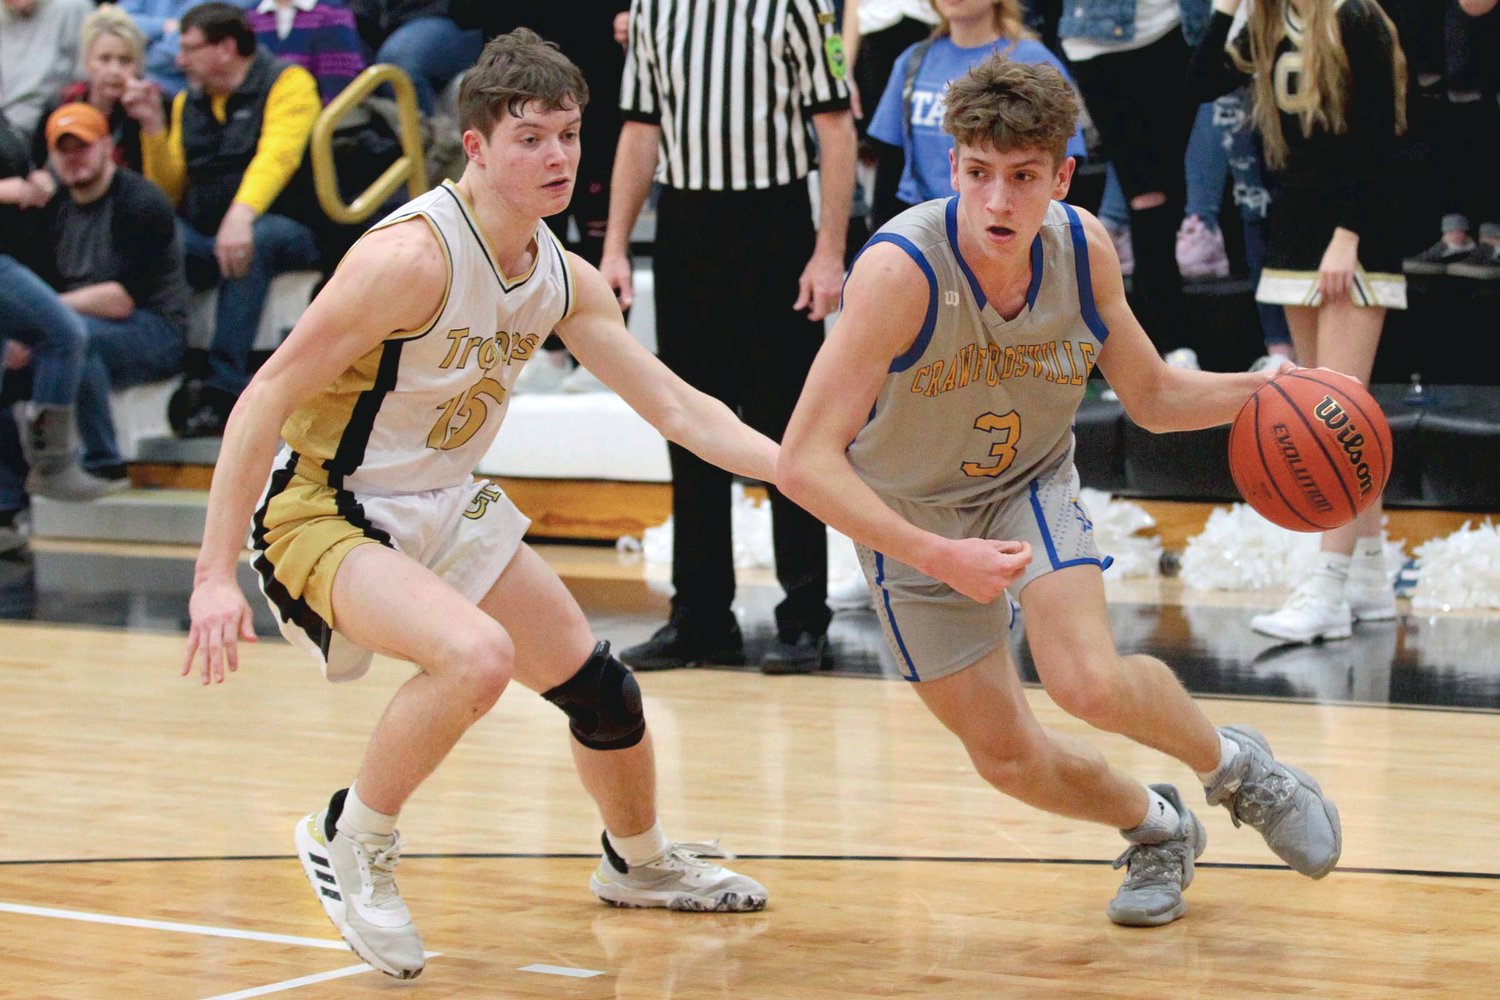 Ty Lynas of Crawfordsville heads toward the paint after getting past Daniel Keller of Covington...Covington defeated Crawfordsville 75-68 in overtime.